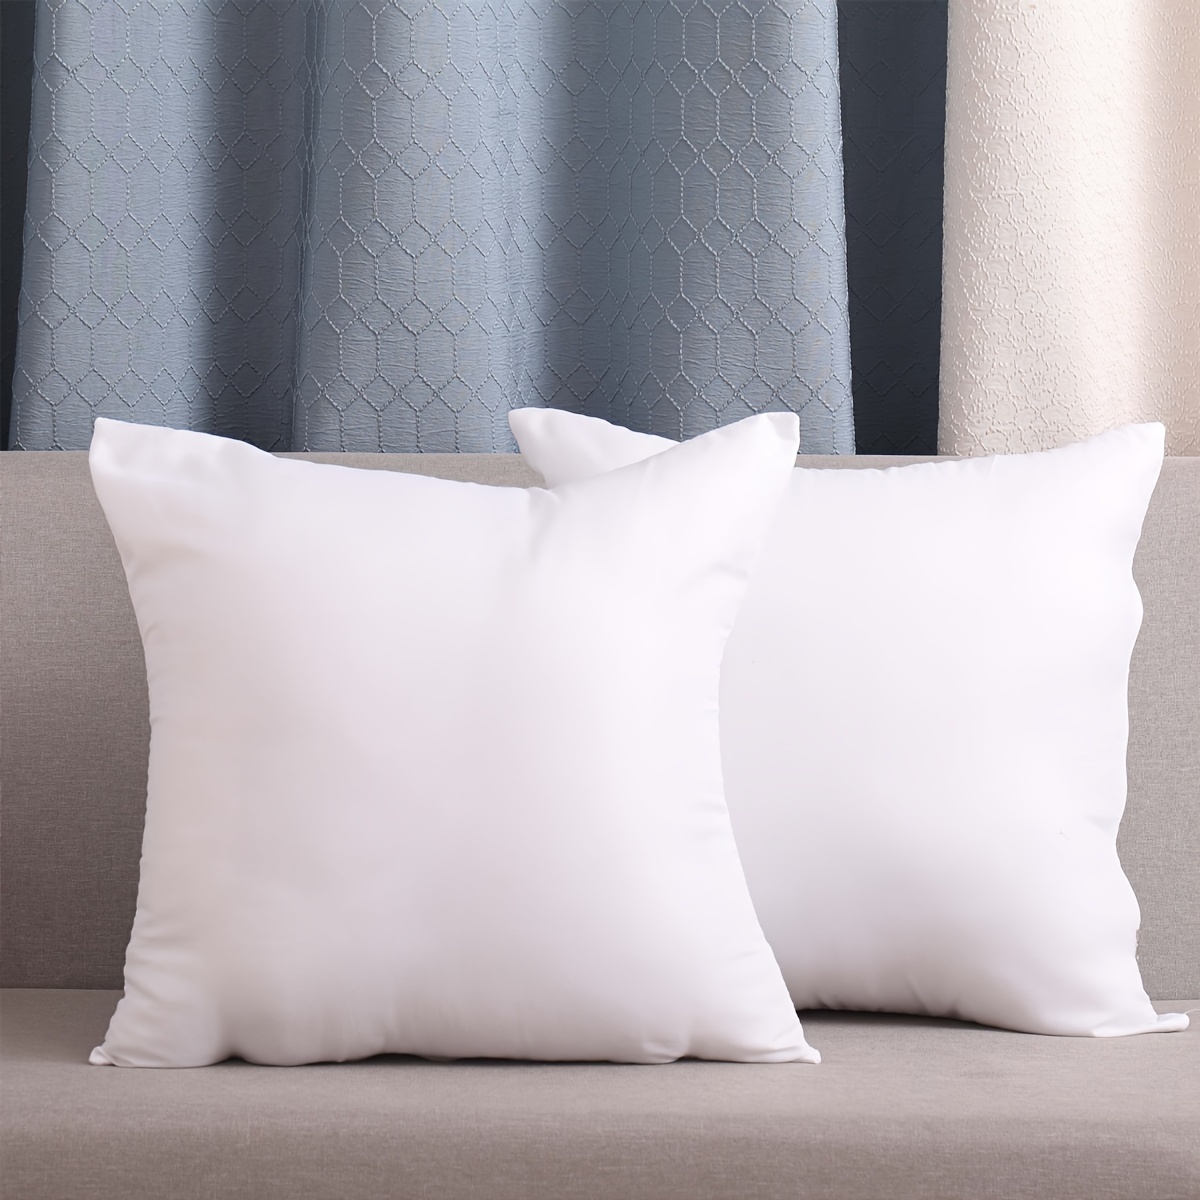 

Contemporary Style Pp Cotton Pillow Insert With Zipper Closure - Suitable For All Seasons And Only Dry Cleanable